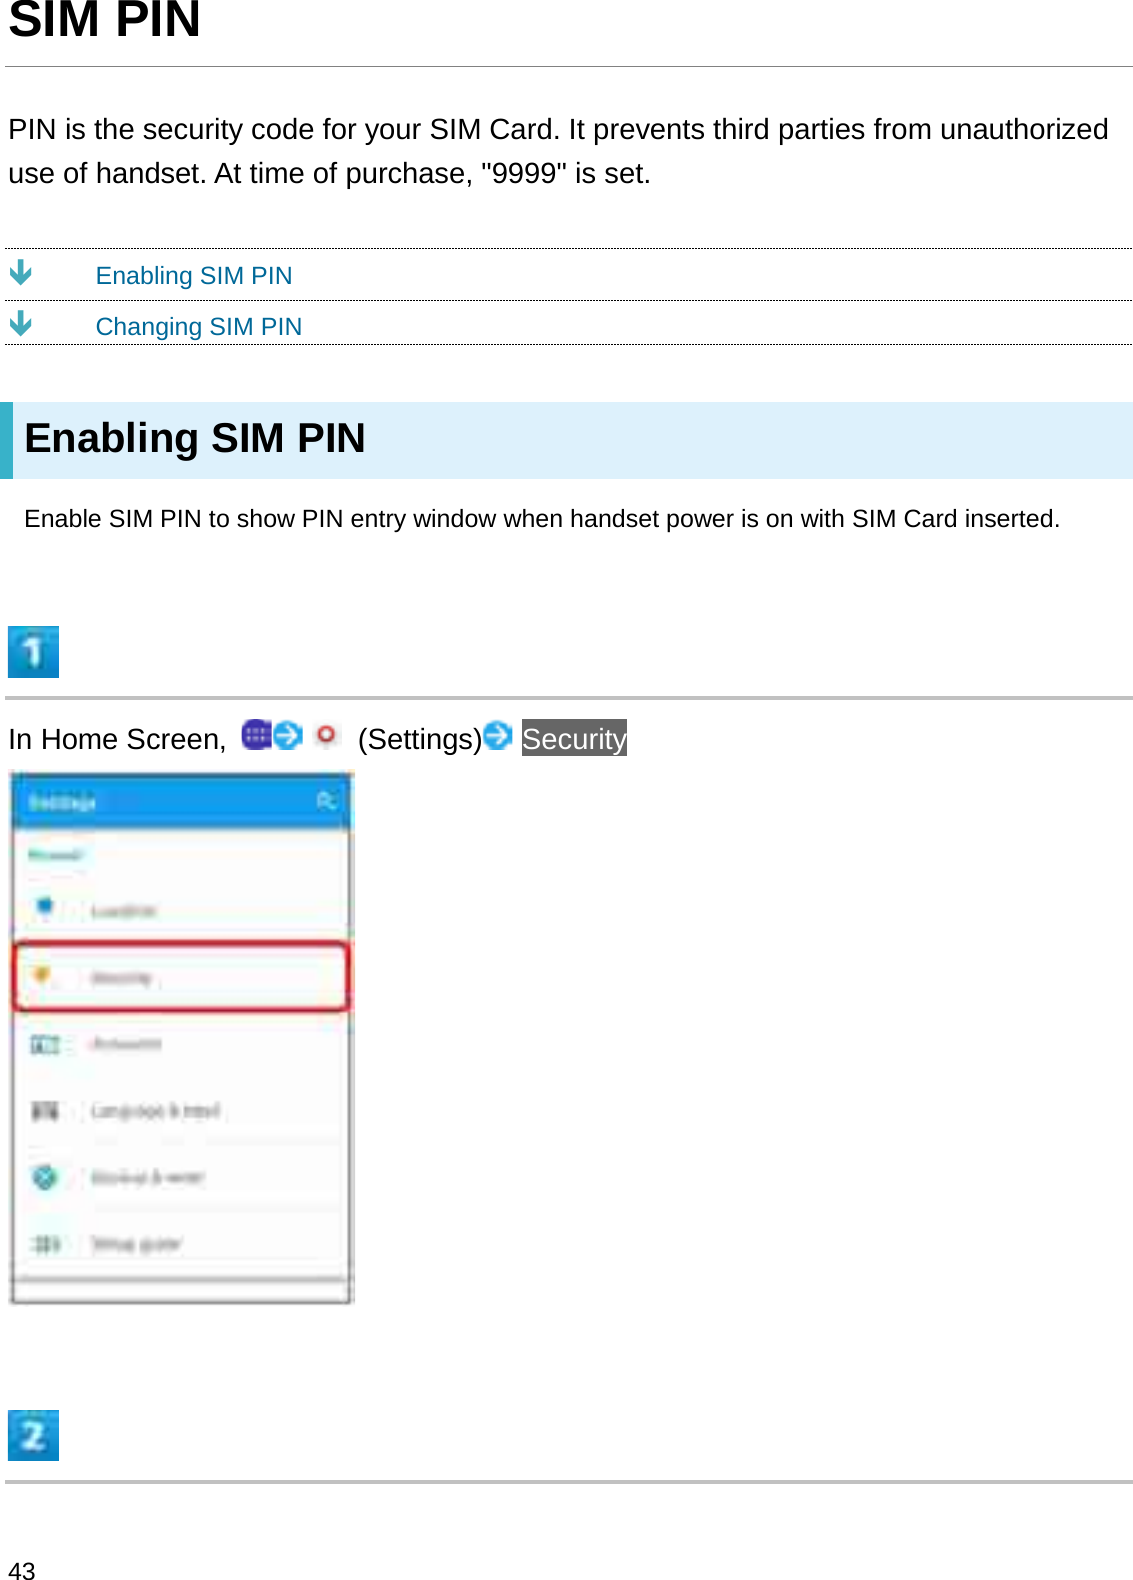 SIM PINPIN is the security code for your SIM Card. It prevents third parties from unauthorized use of handset. At time of purchase, &quot;9999&quot; is set.ÐEnabling SIM PINÐChanging SIM PINEnabling SIM PINEnable SIM PIN to show PIN entry window when handset power is on with SIM Card inserted.In Home Screen,  (Settings) Security43